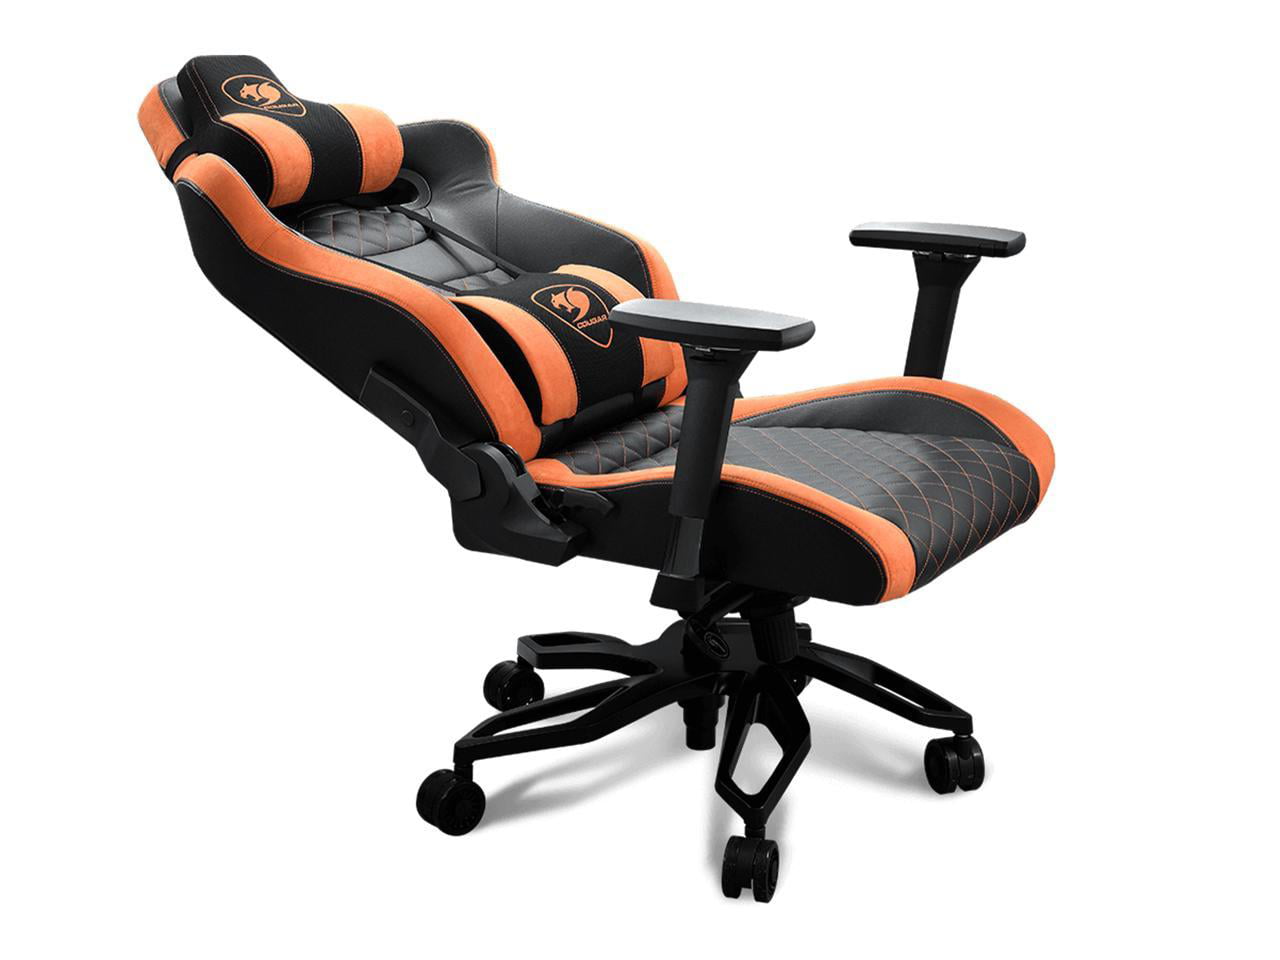 COUGAR Titan Pro Royal Flagship Gaming Chair with Breathable PVC Leather,  Premium Suede-Like Texture, 160kg Max Load Capacity, 170° Reclining, 5-Star  Aluminum Alloy Base, Black-Orange